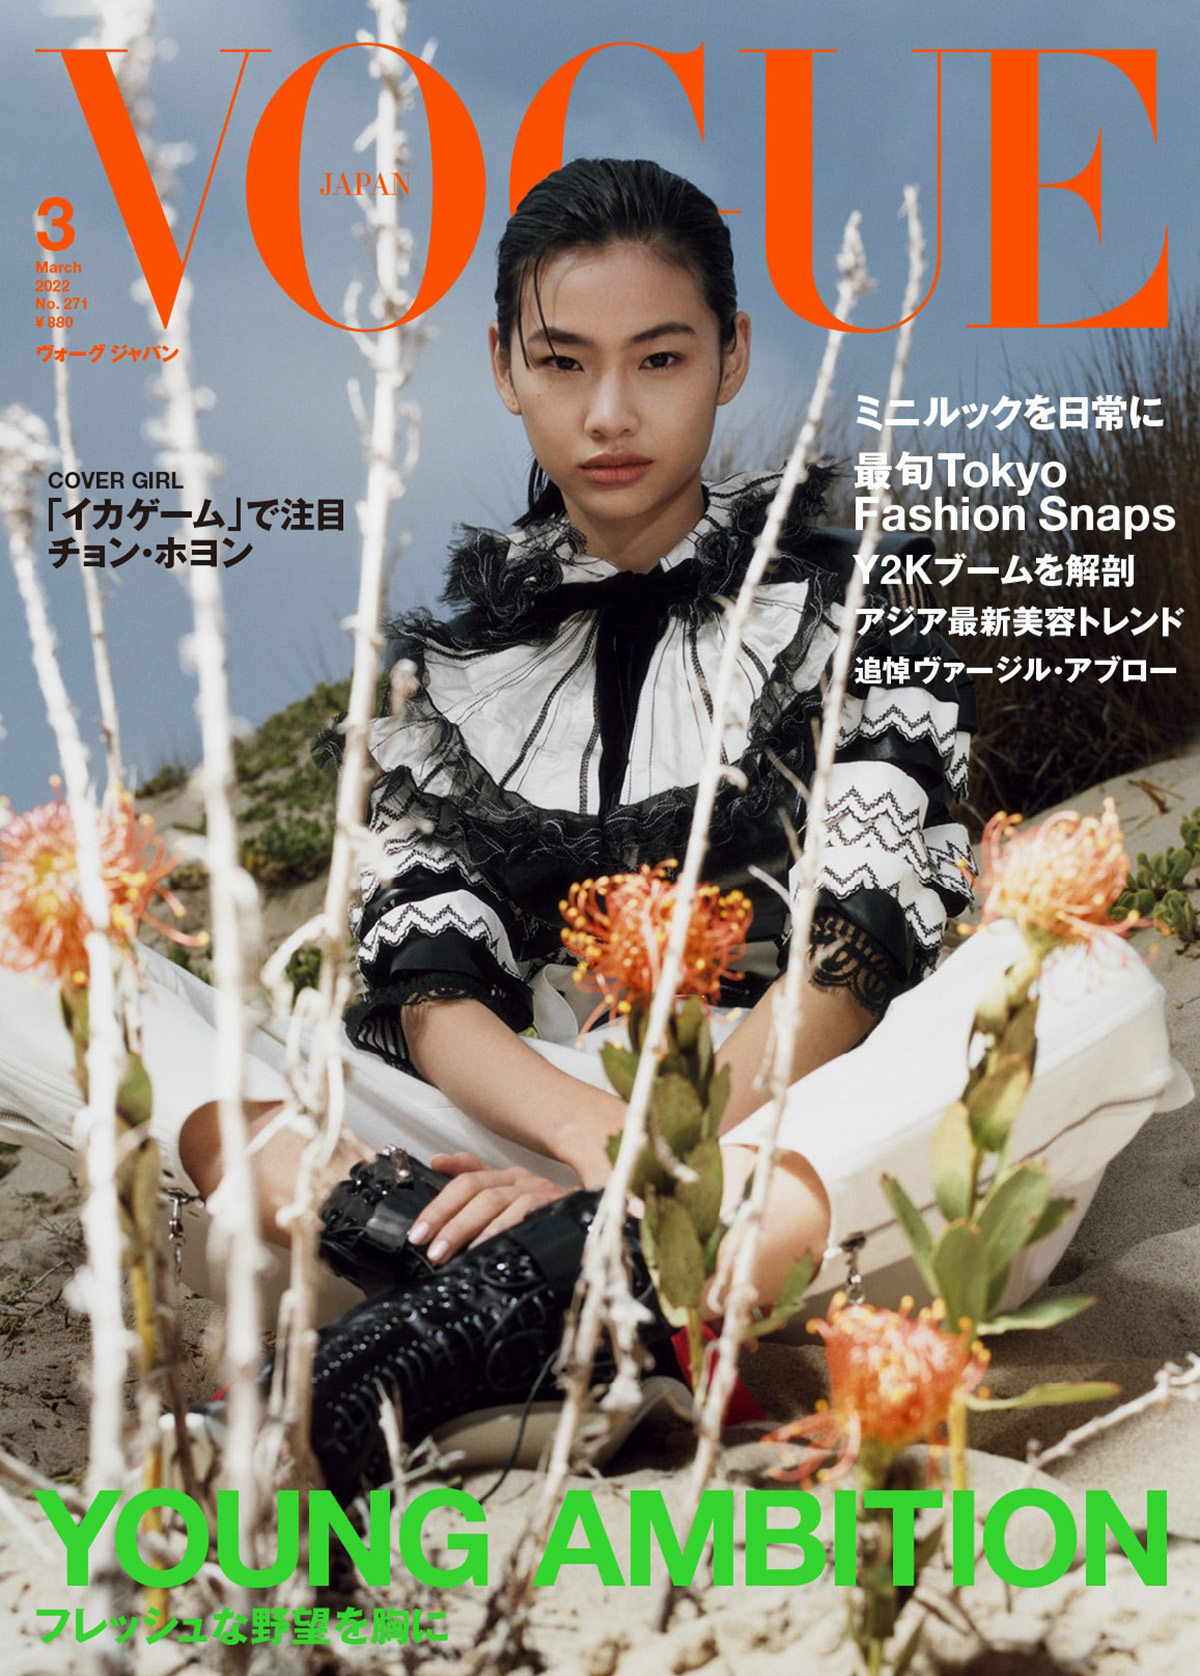 HoYeon Jung in Louis Vuitton on Vogue US February 2022 and Vogue Japan March 2022 covers by Harley Weir